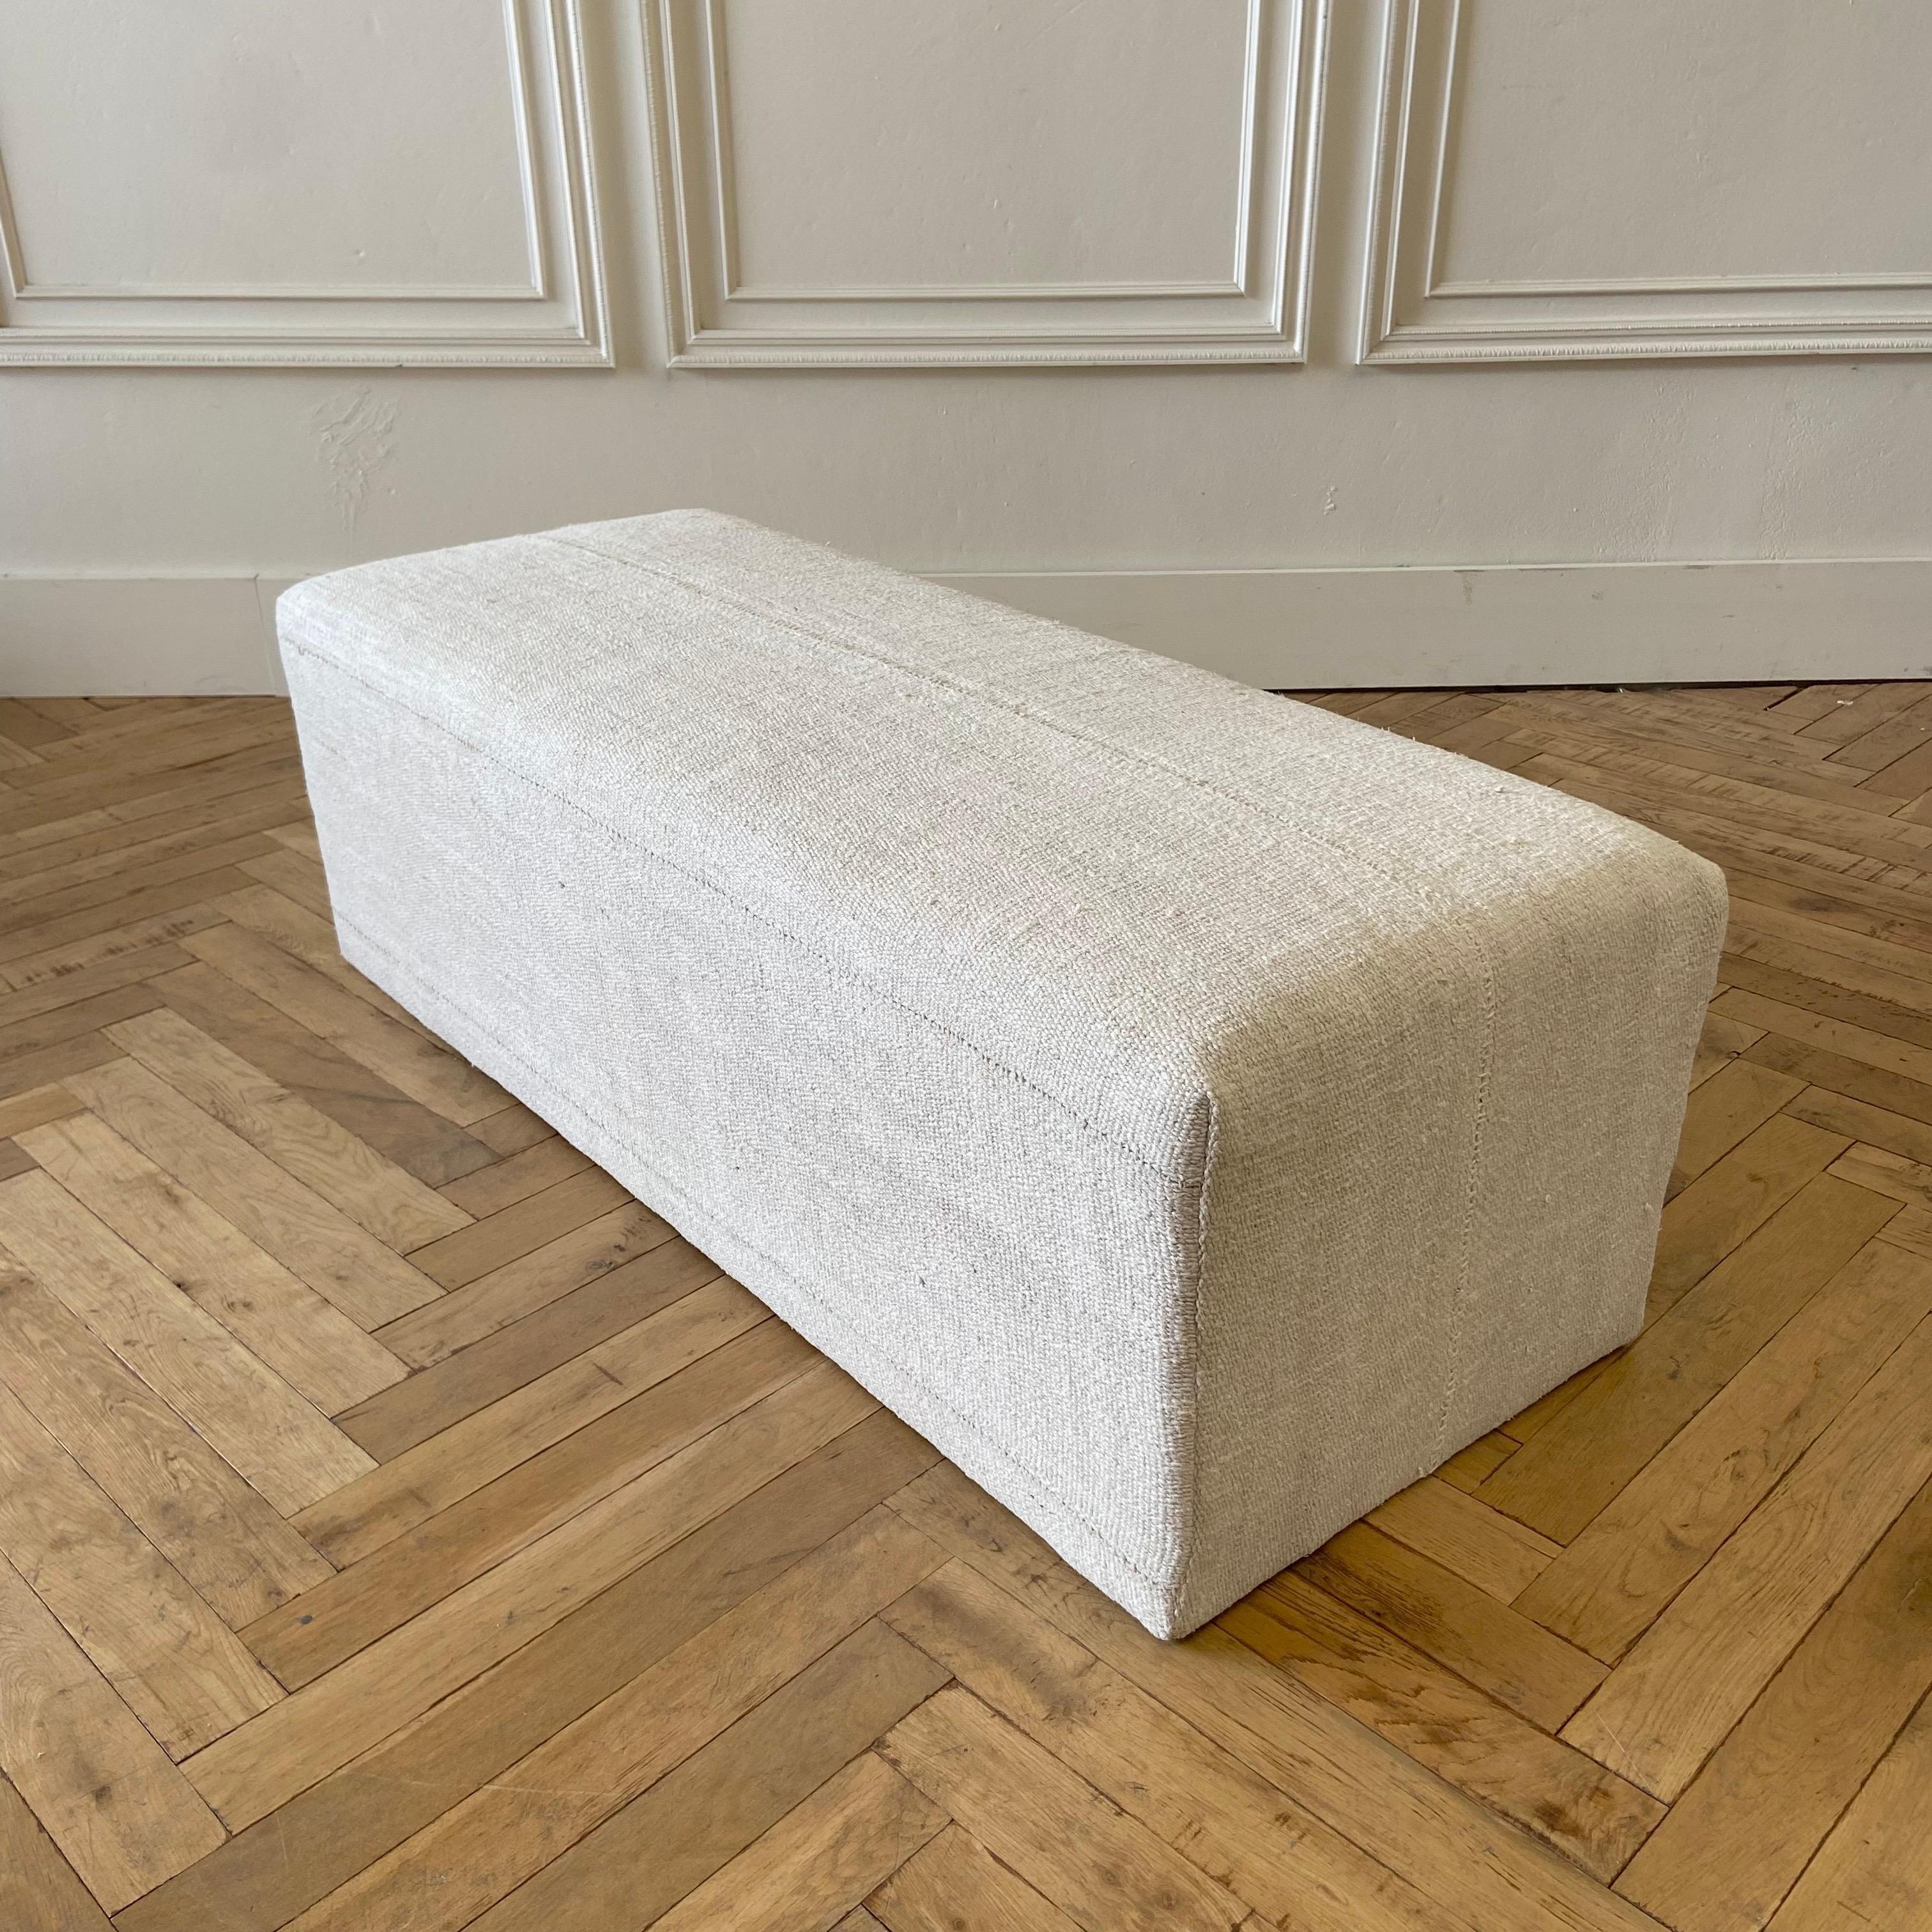 Beautiful Custom Made Cube ottoman 
Size: 53”W X 20”D X 18”H
Made from a vintage turkish hemp and wool rug, in an off white, with original beautiful hand tied stitched center seam.
Original seams, sewn with an overlock under to prevent any